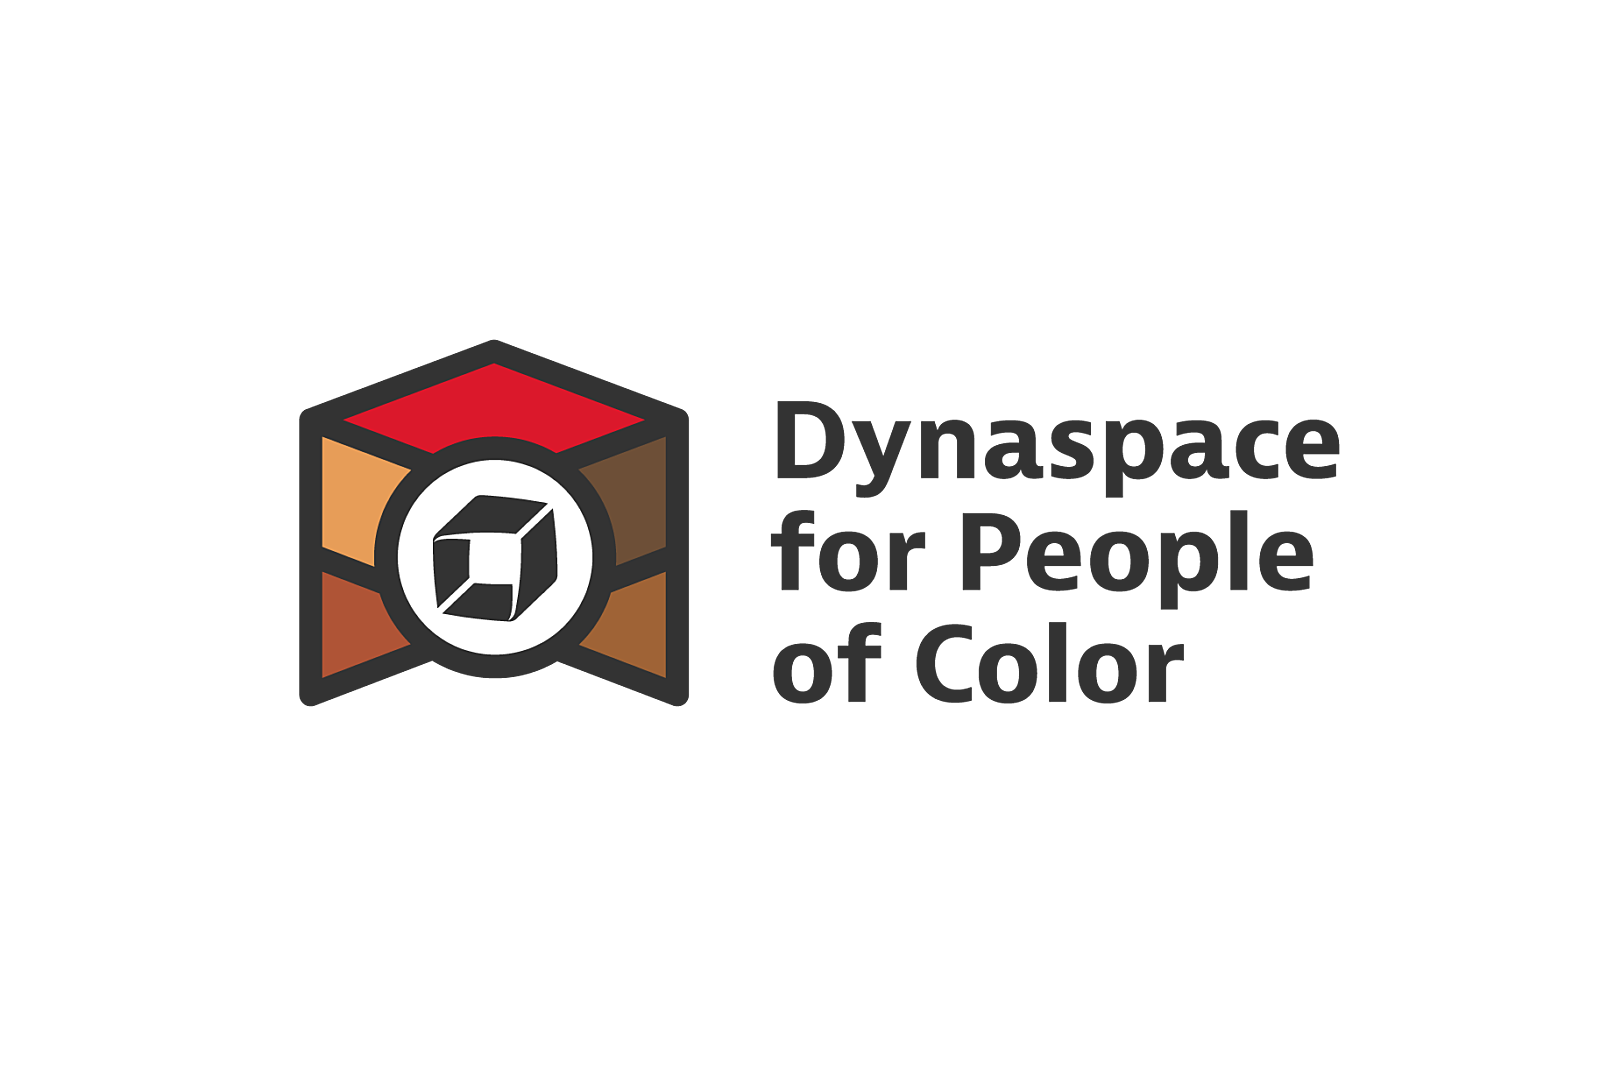 Dynaspace for People of Color